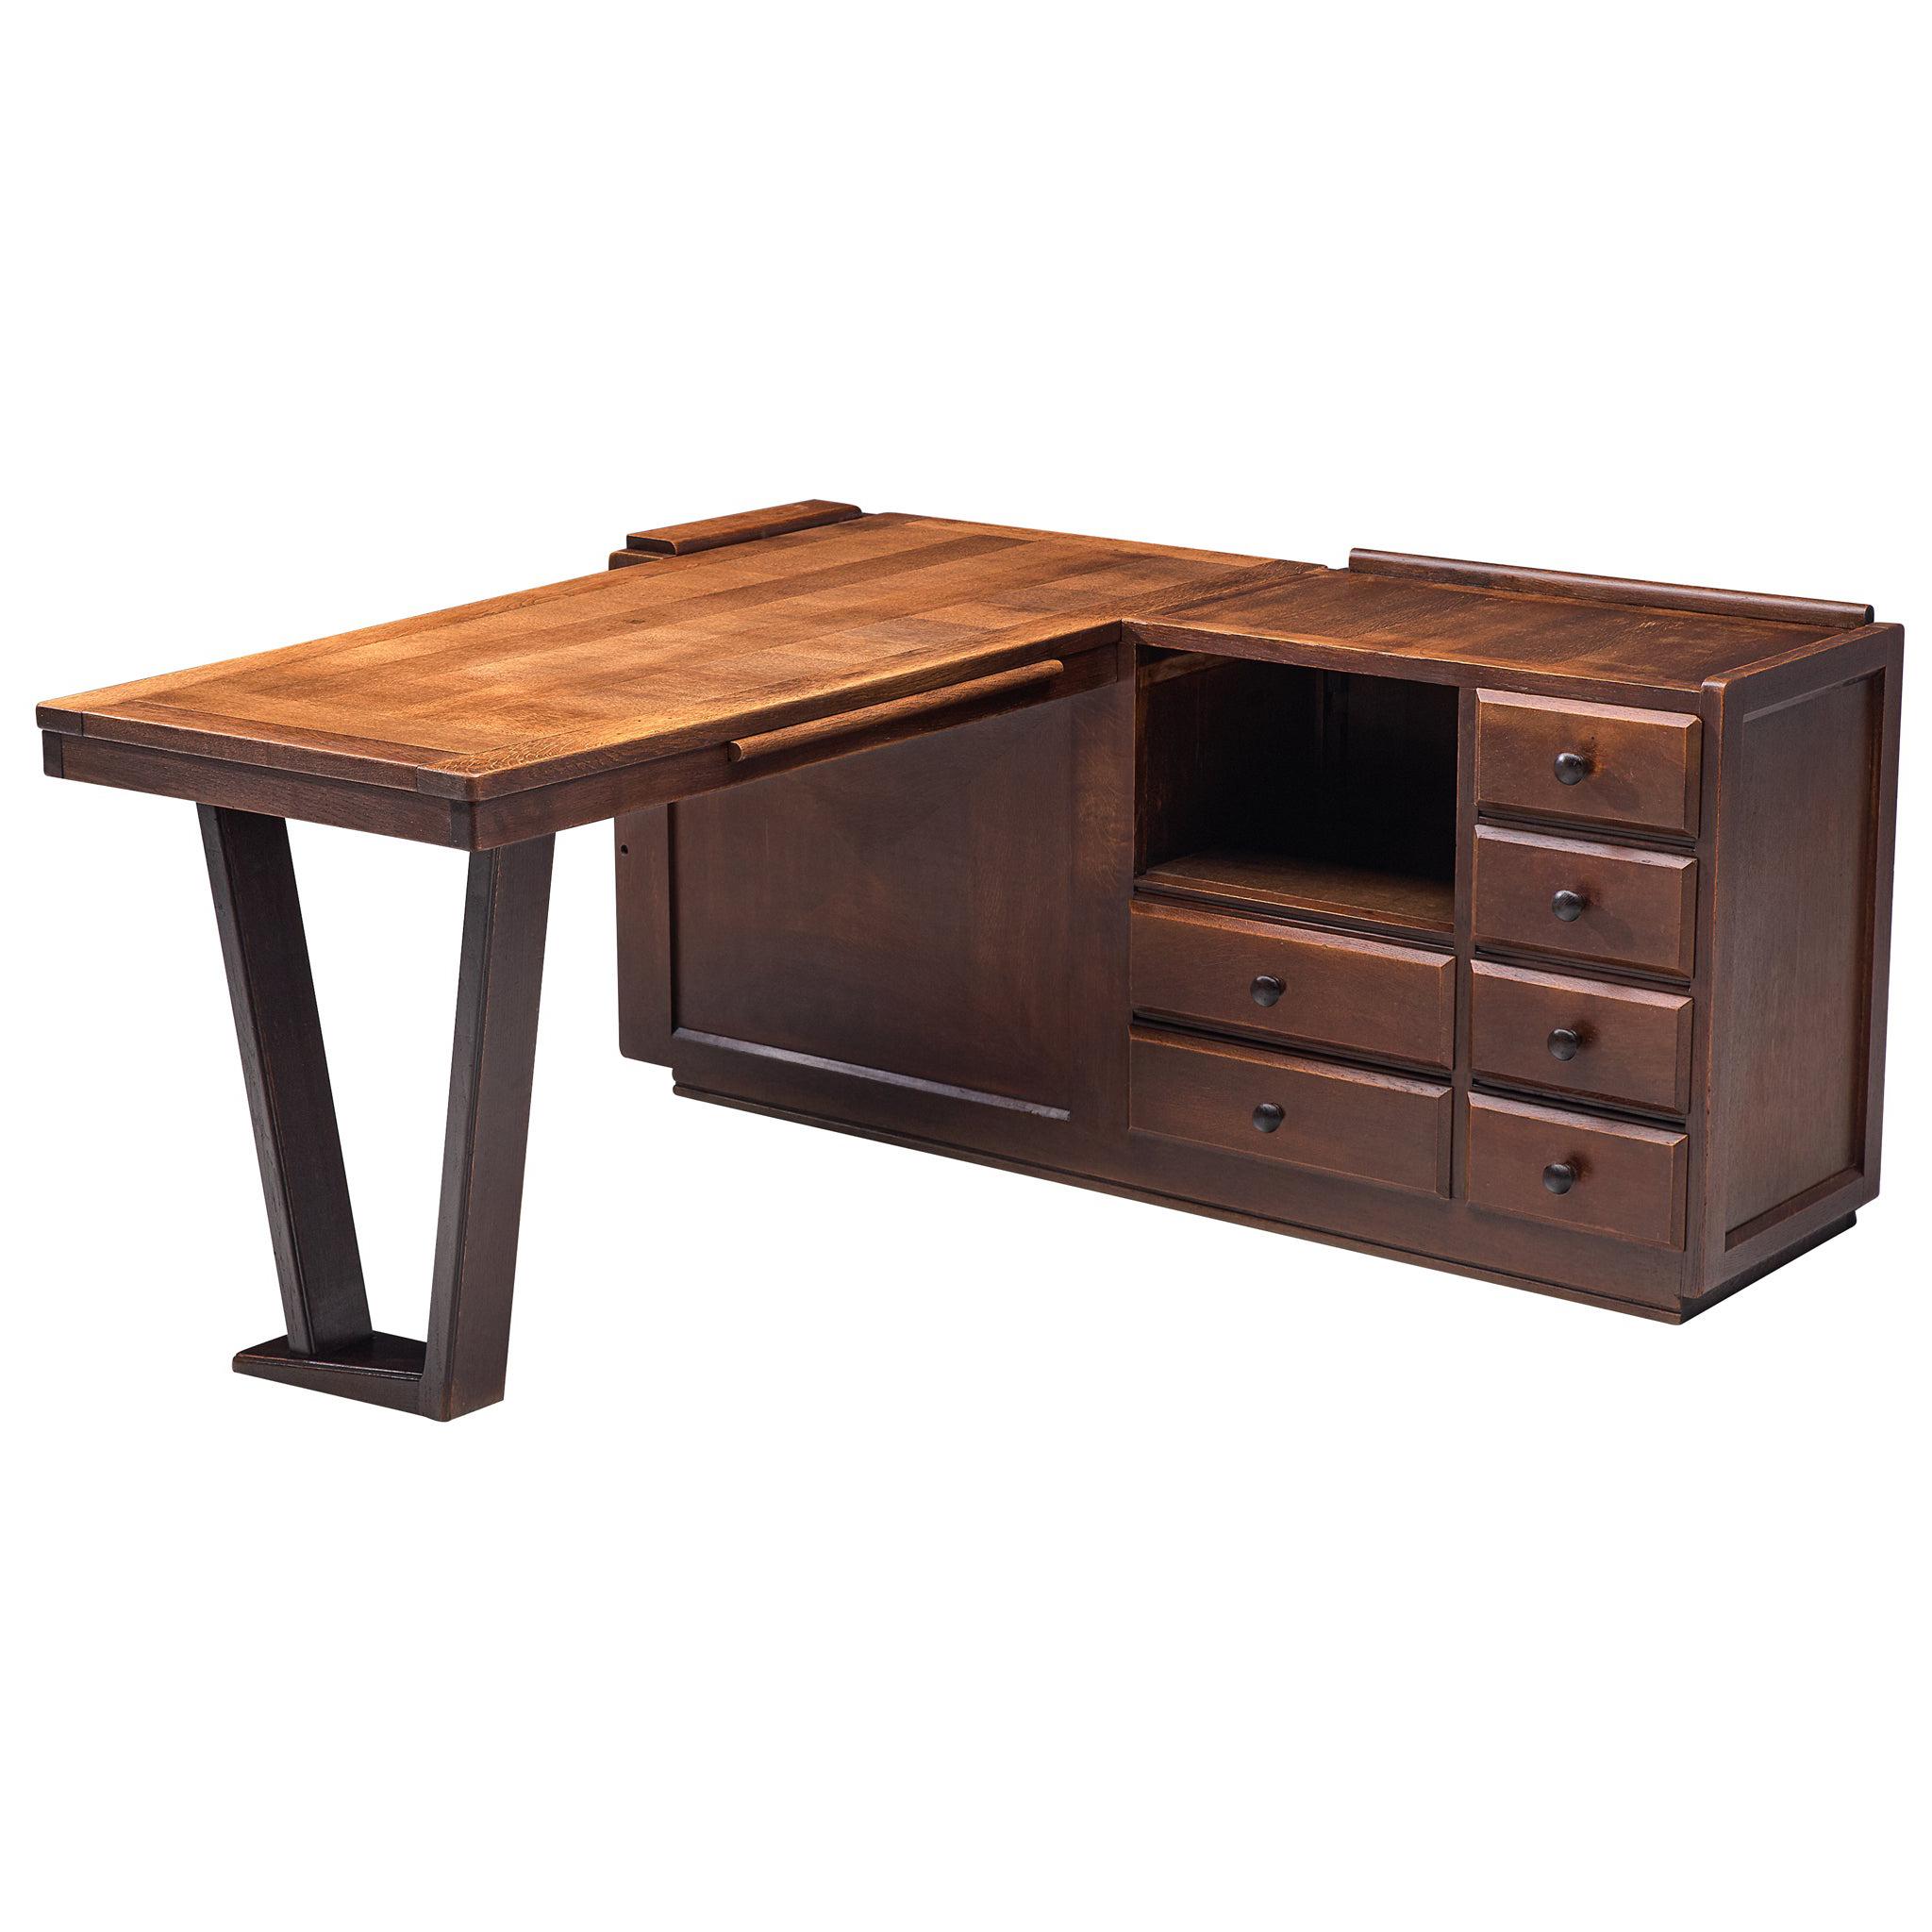 Guillerme & Chambron Free-Standing Corner Desk in Stained Oak